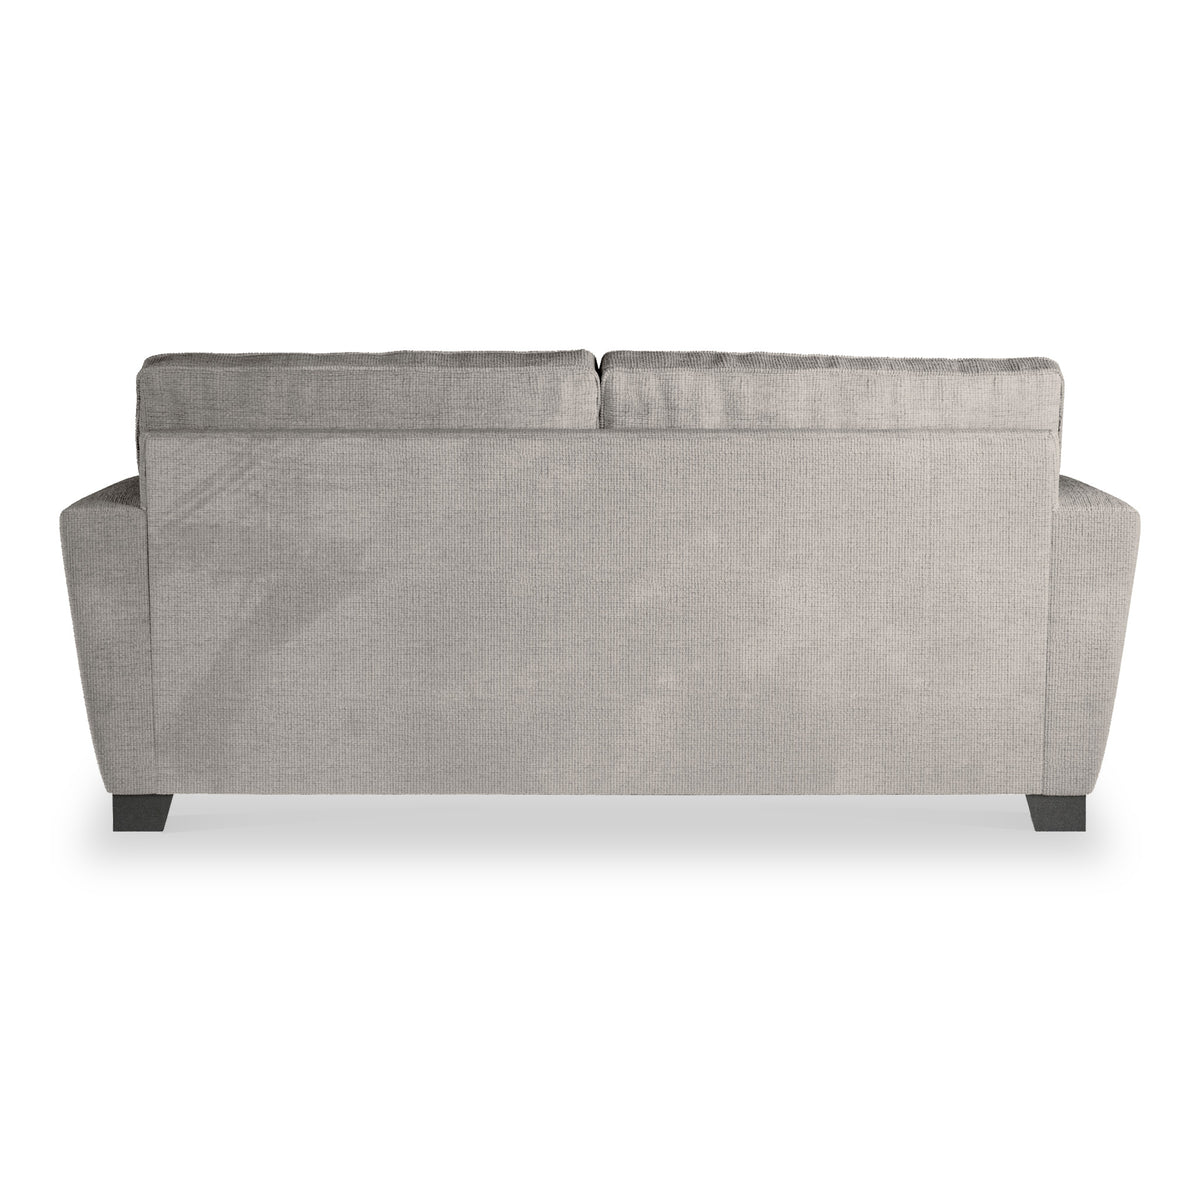 Chester Pewter Hopsack 3 Seater Sofa